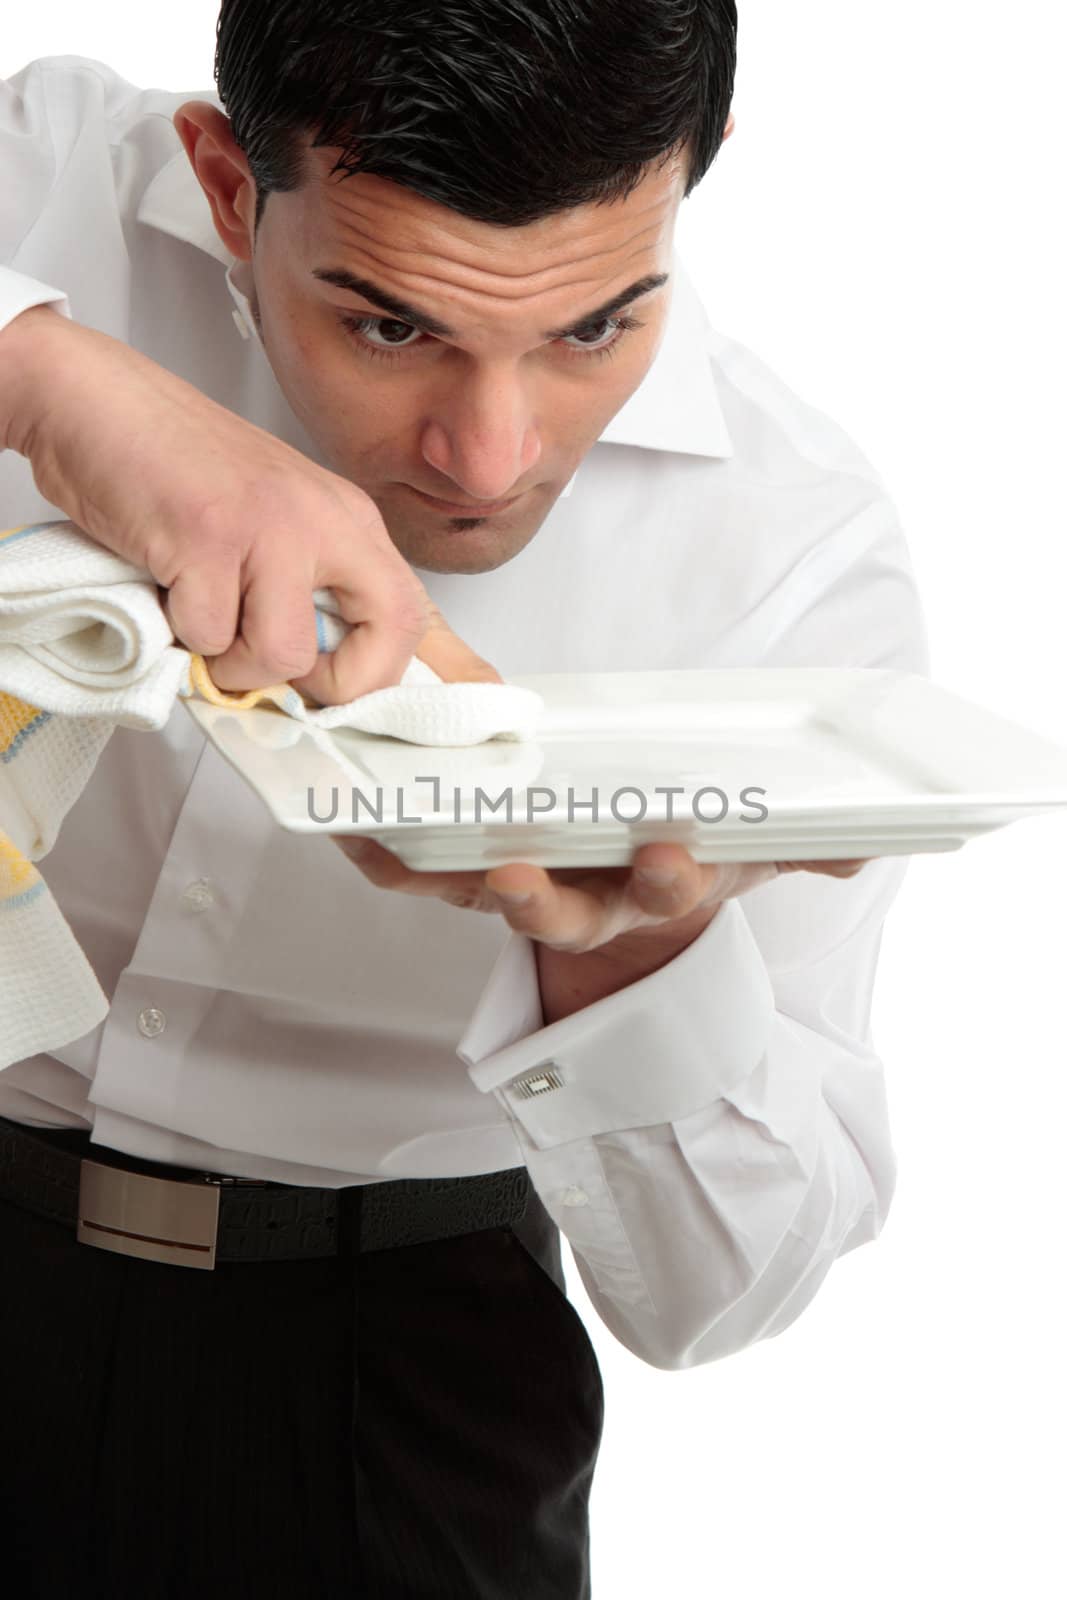 A male waiter servant or other hospitality staff worker is cleaning and polishing a white plate ready for service.